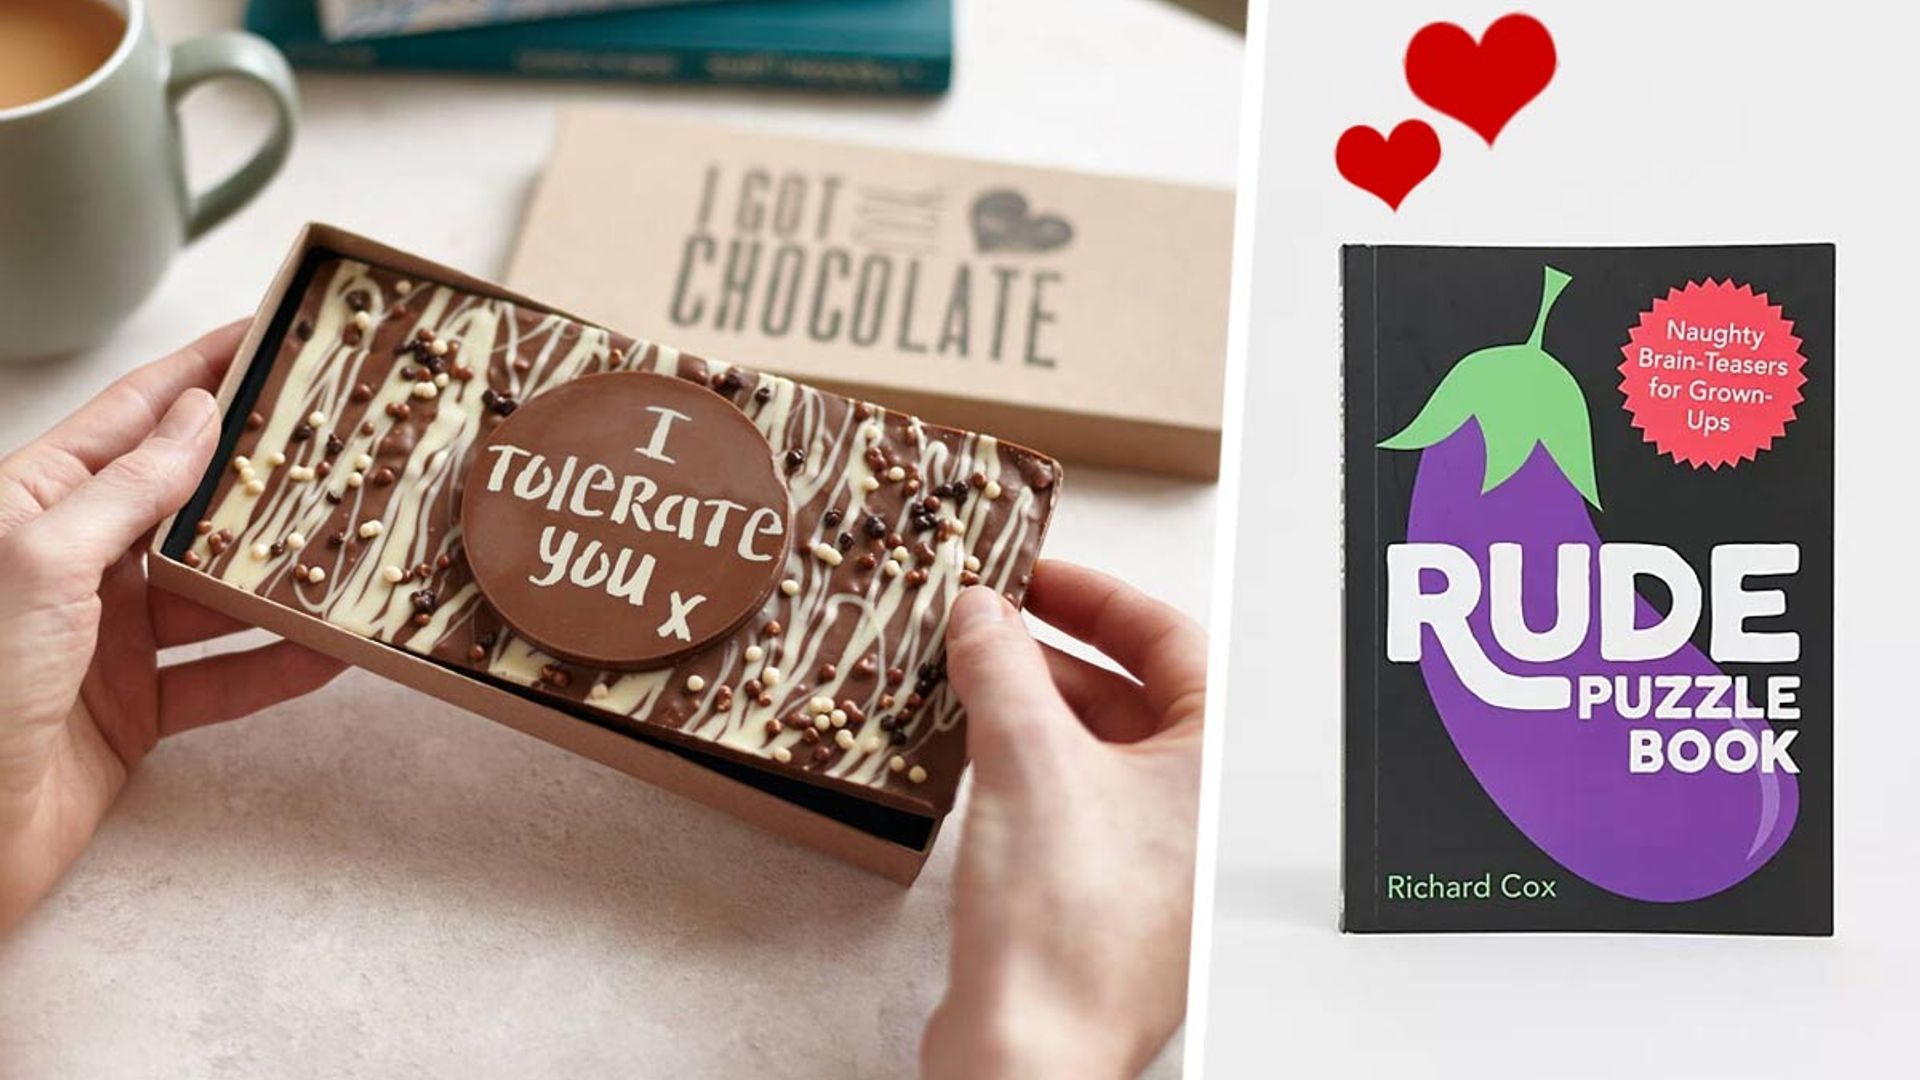 11 funny Valentine’s Day gifts under £20 to make your other half laugh